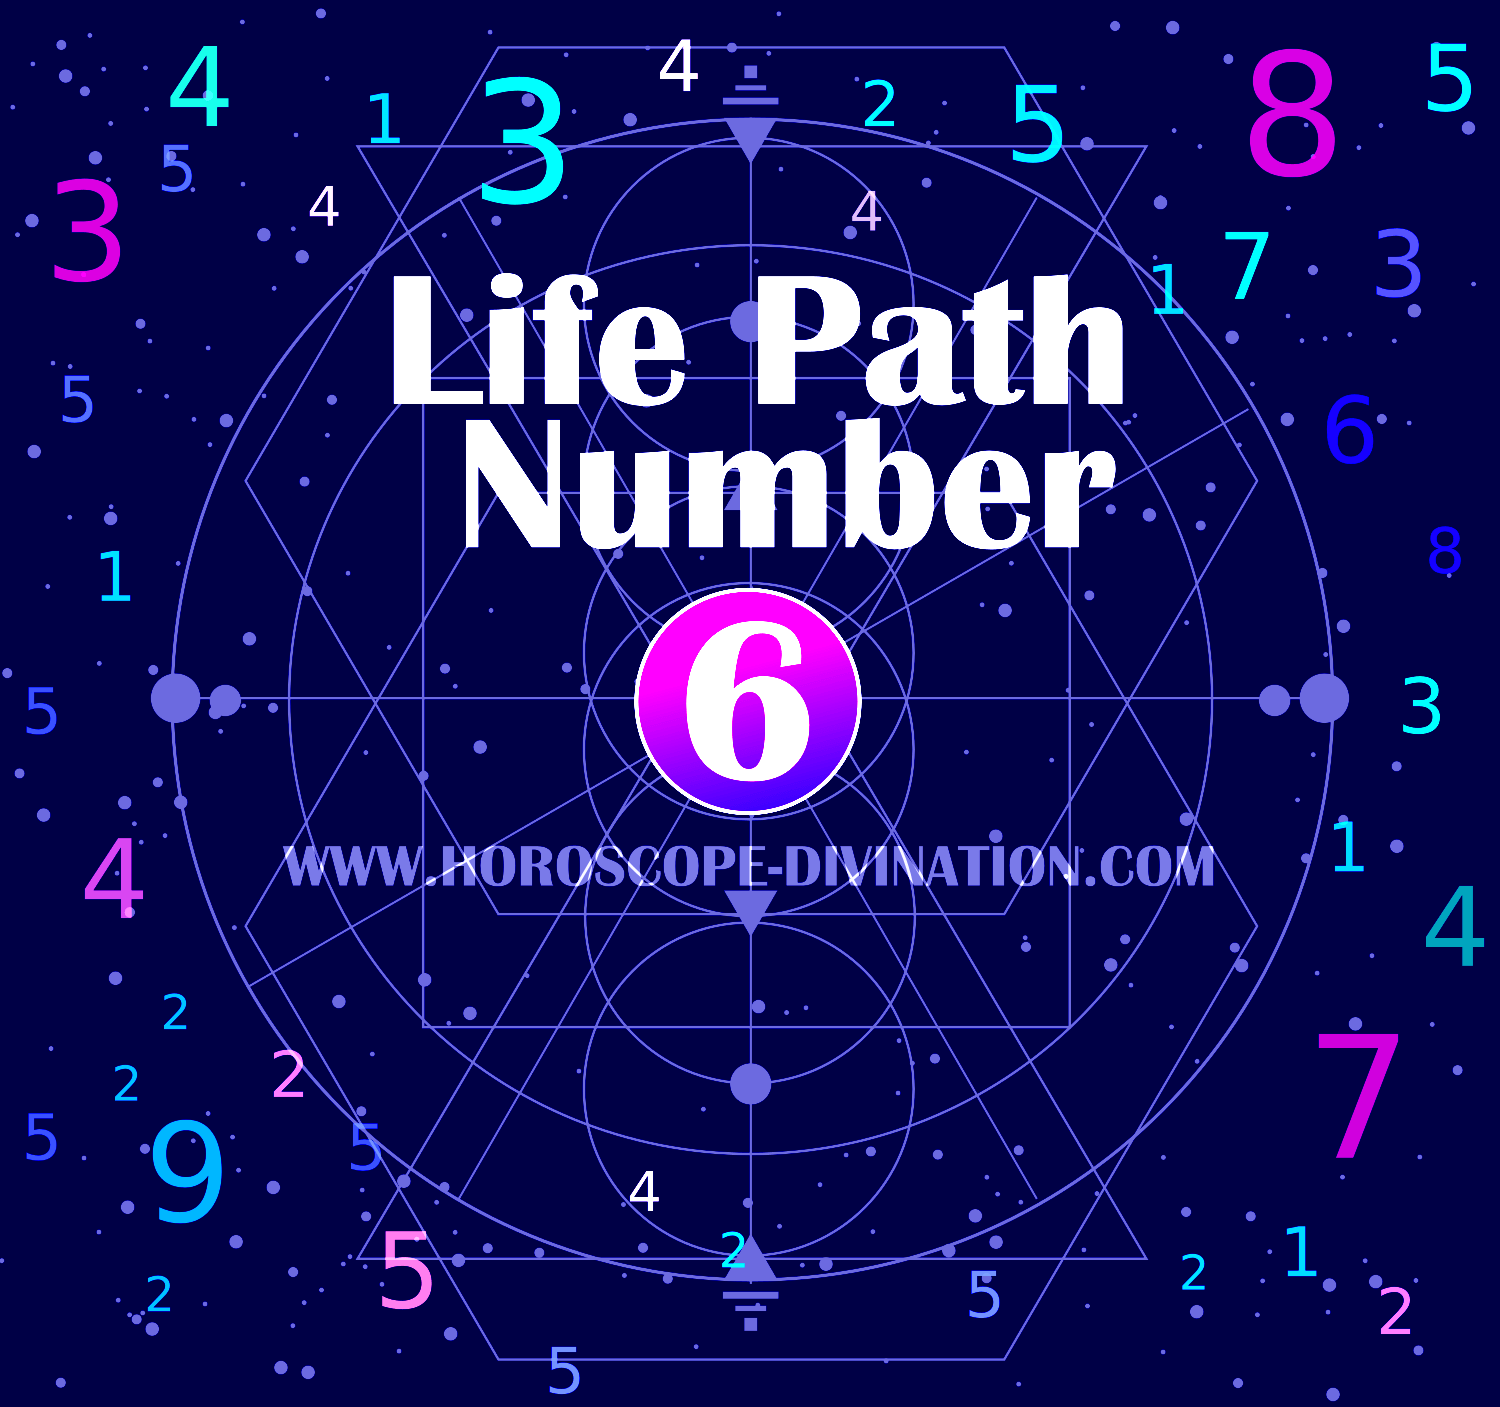 exprission numerology 6